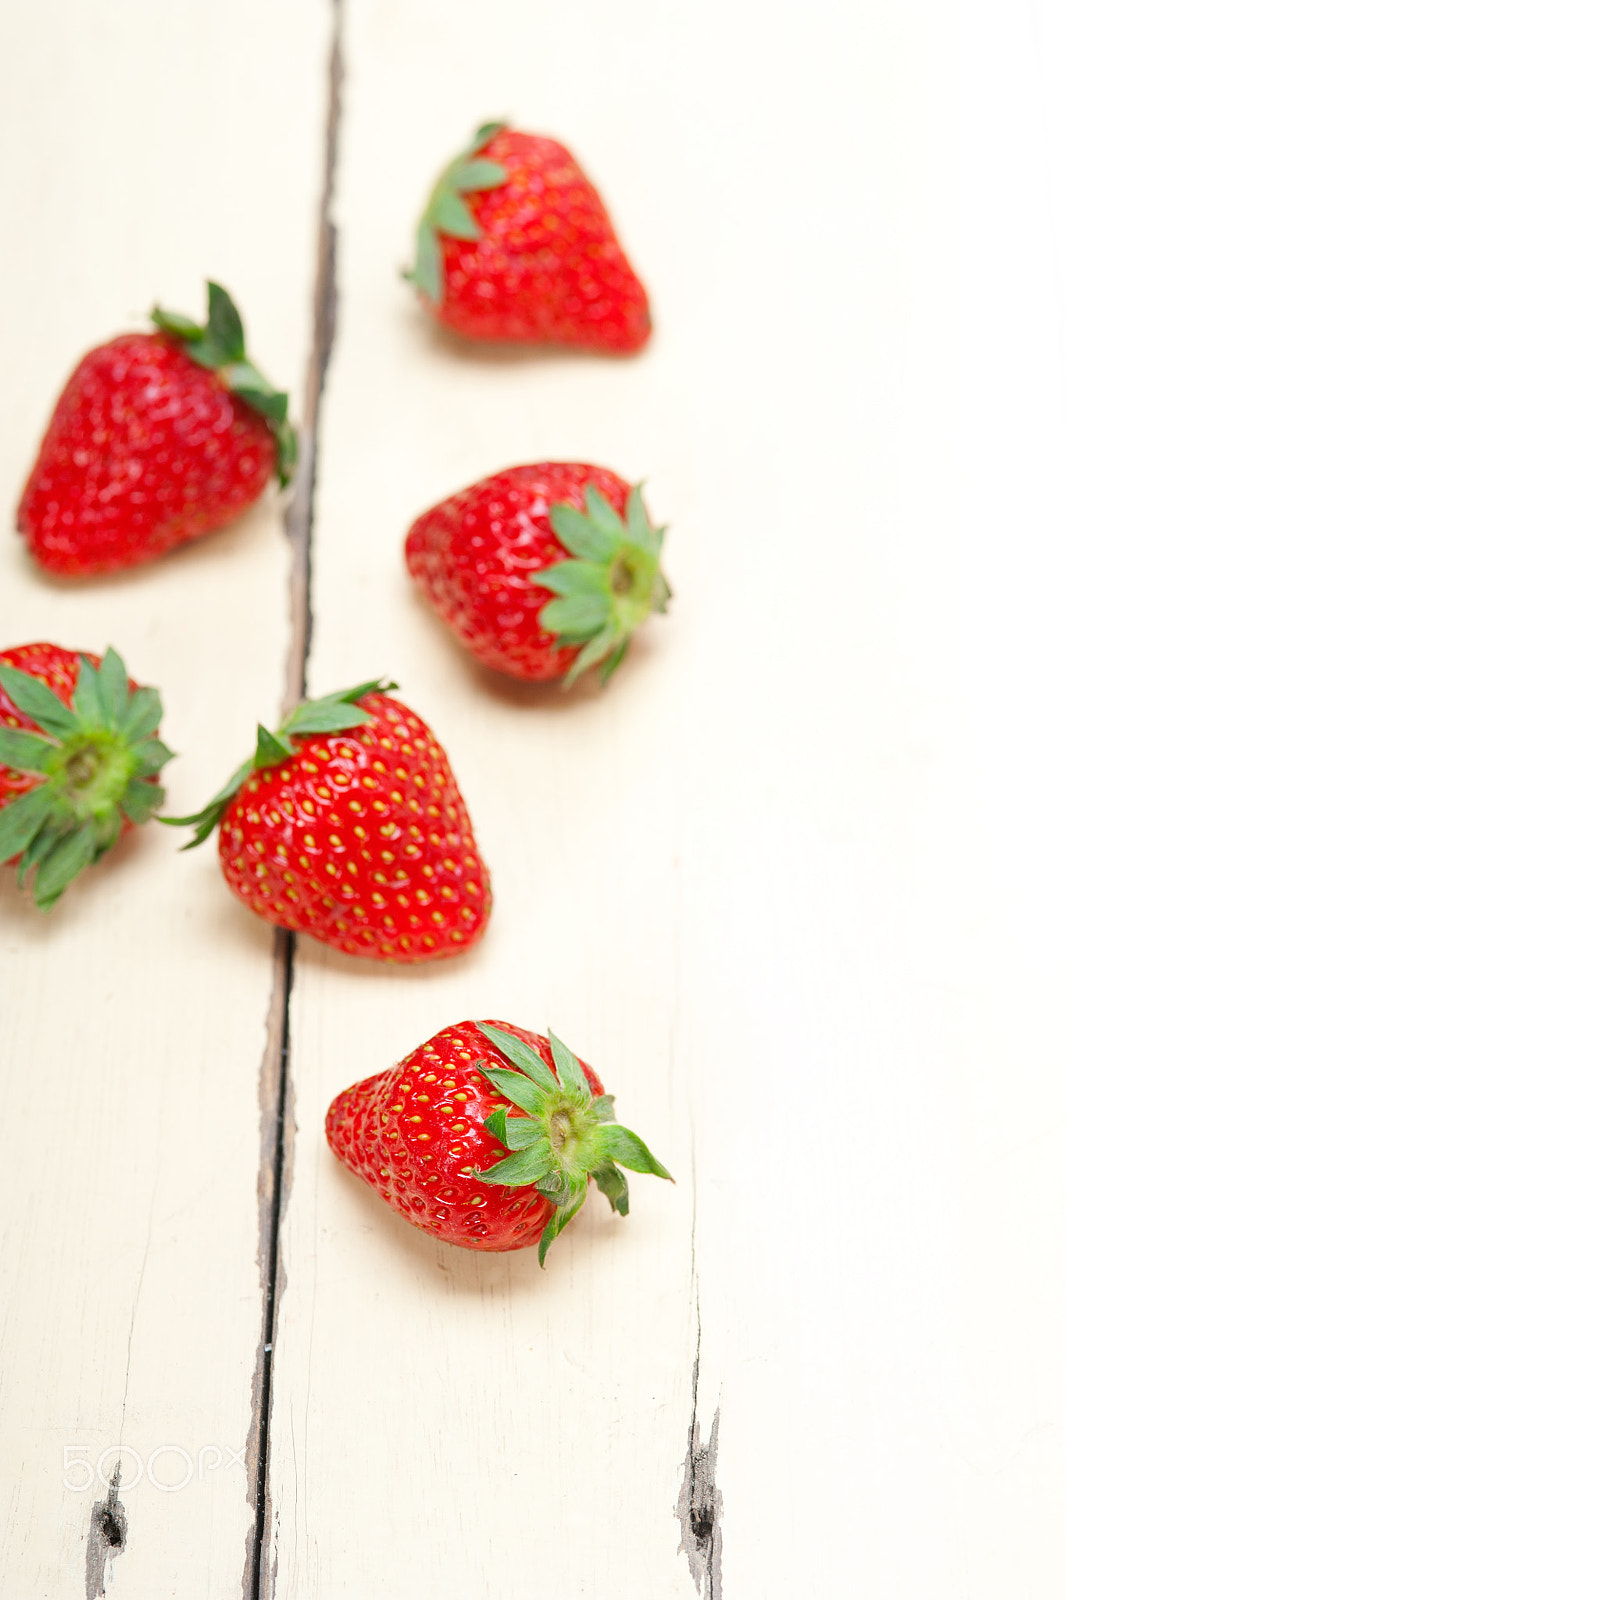 AF Micro-Nikkor 105mm f/2.8 sample photo. Fresh organic strawberry over white wood photography